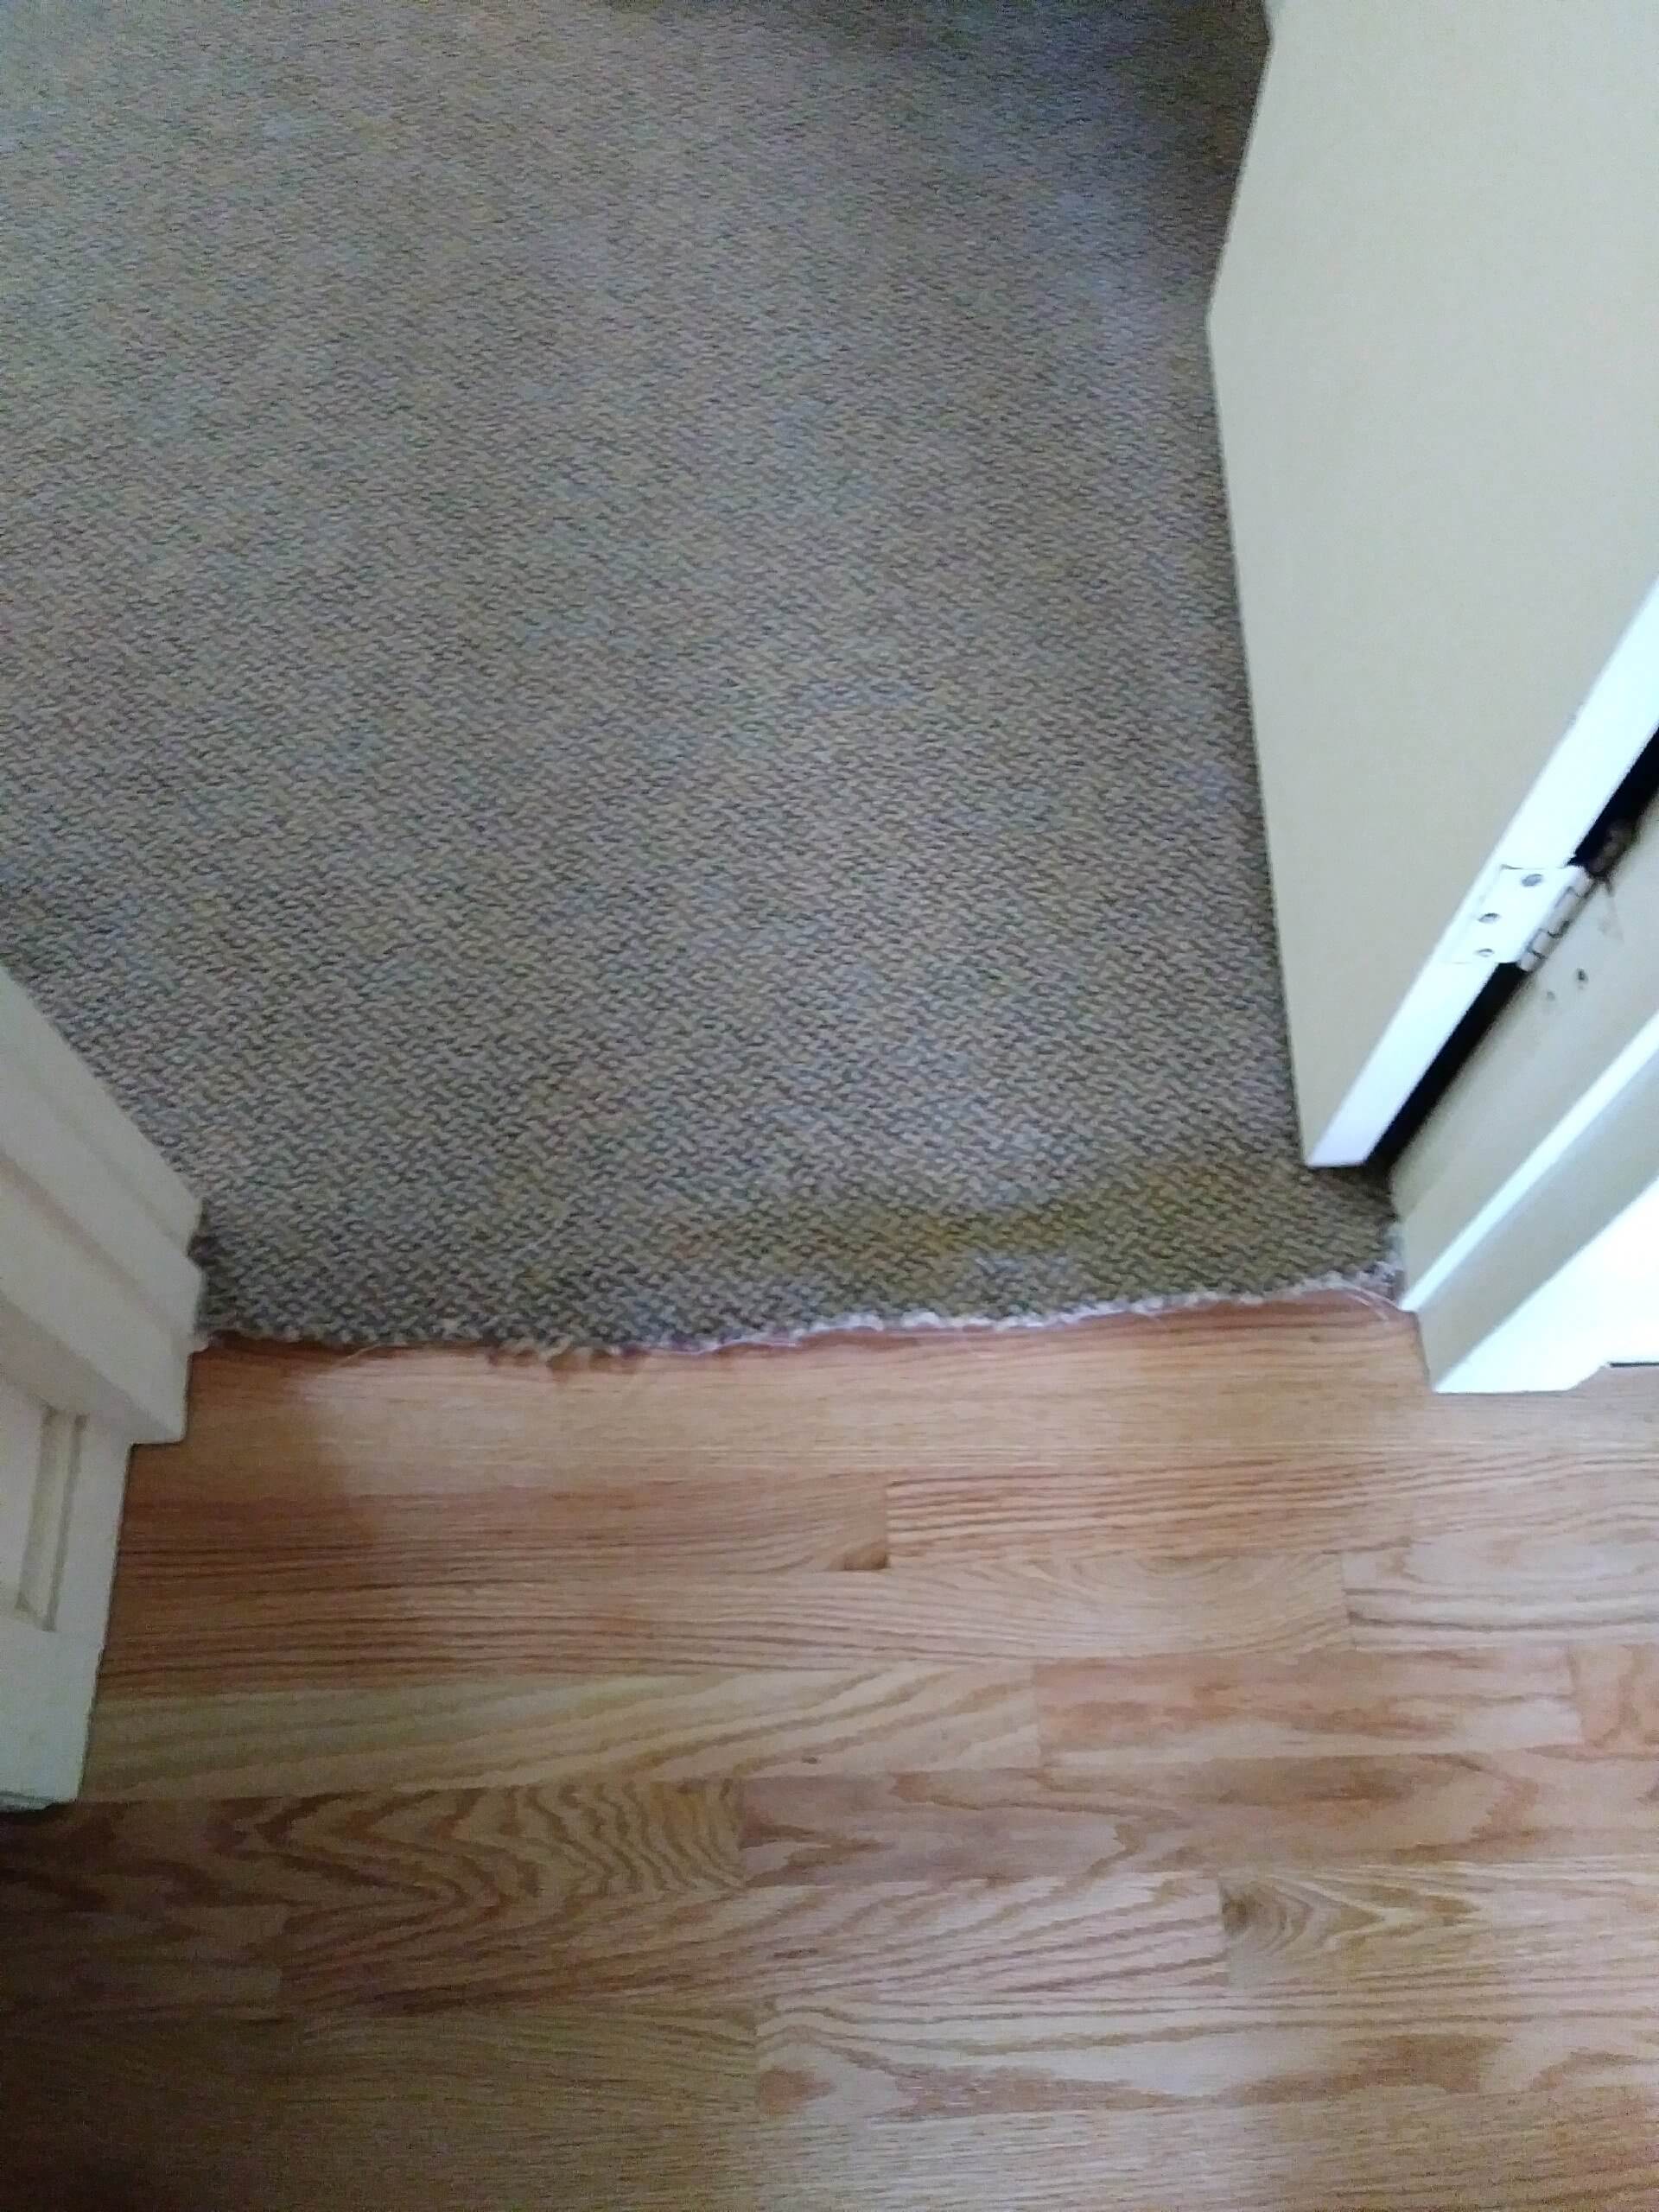 Before and After Photo Gallery Carpet Repair, Stretching, and